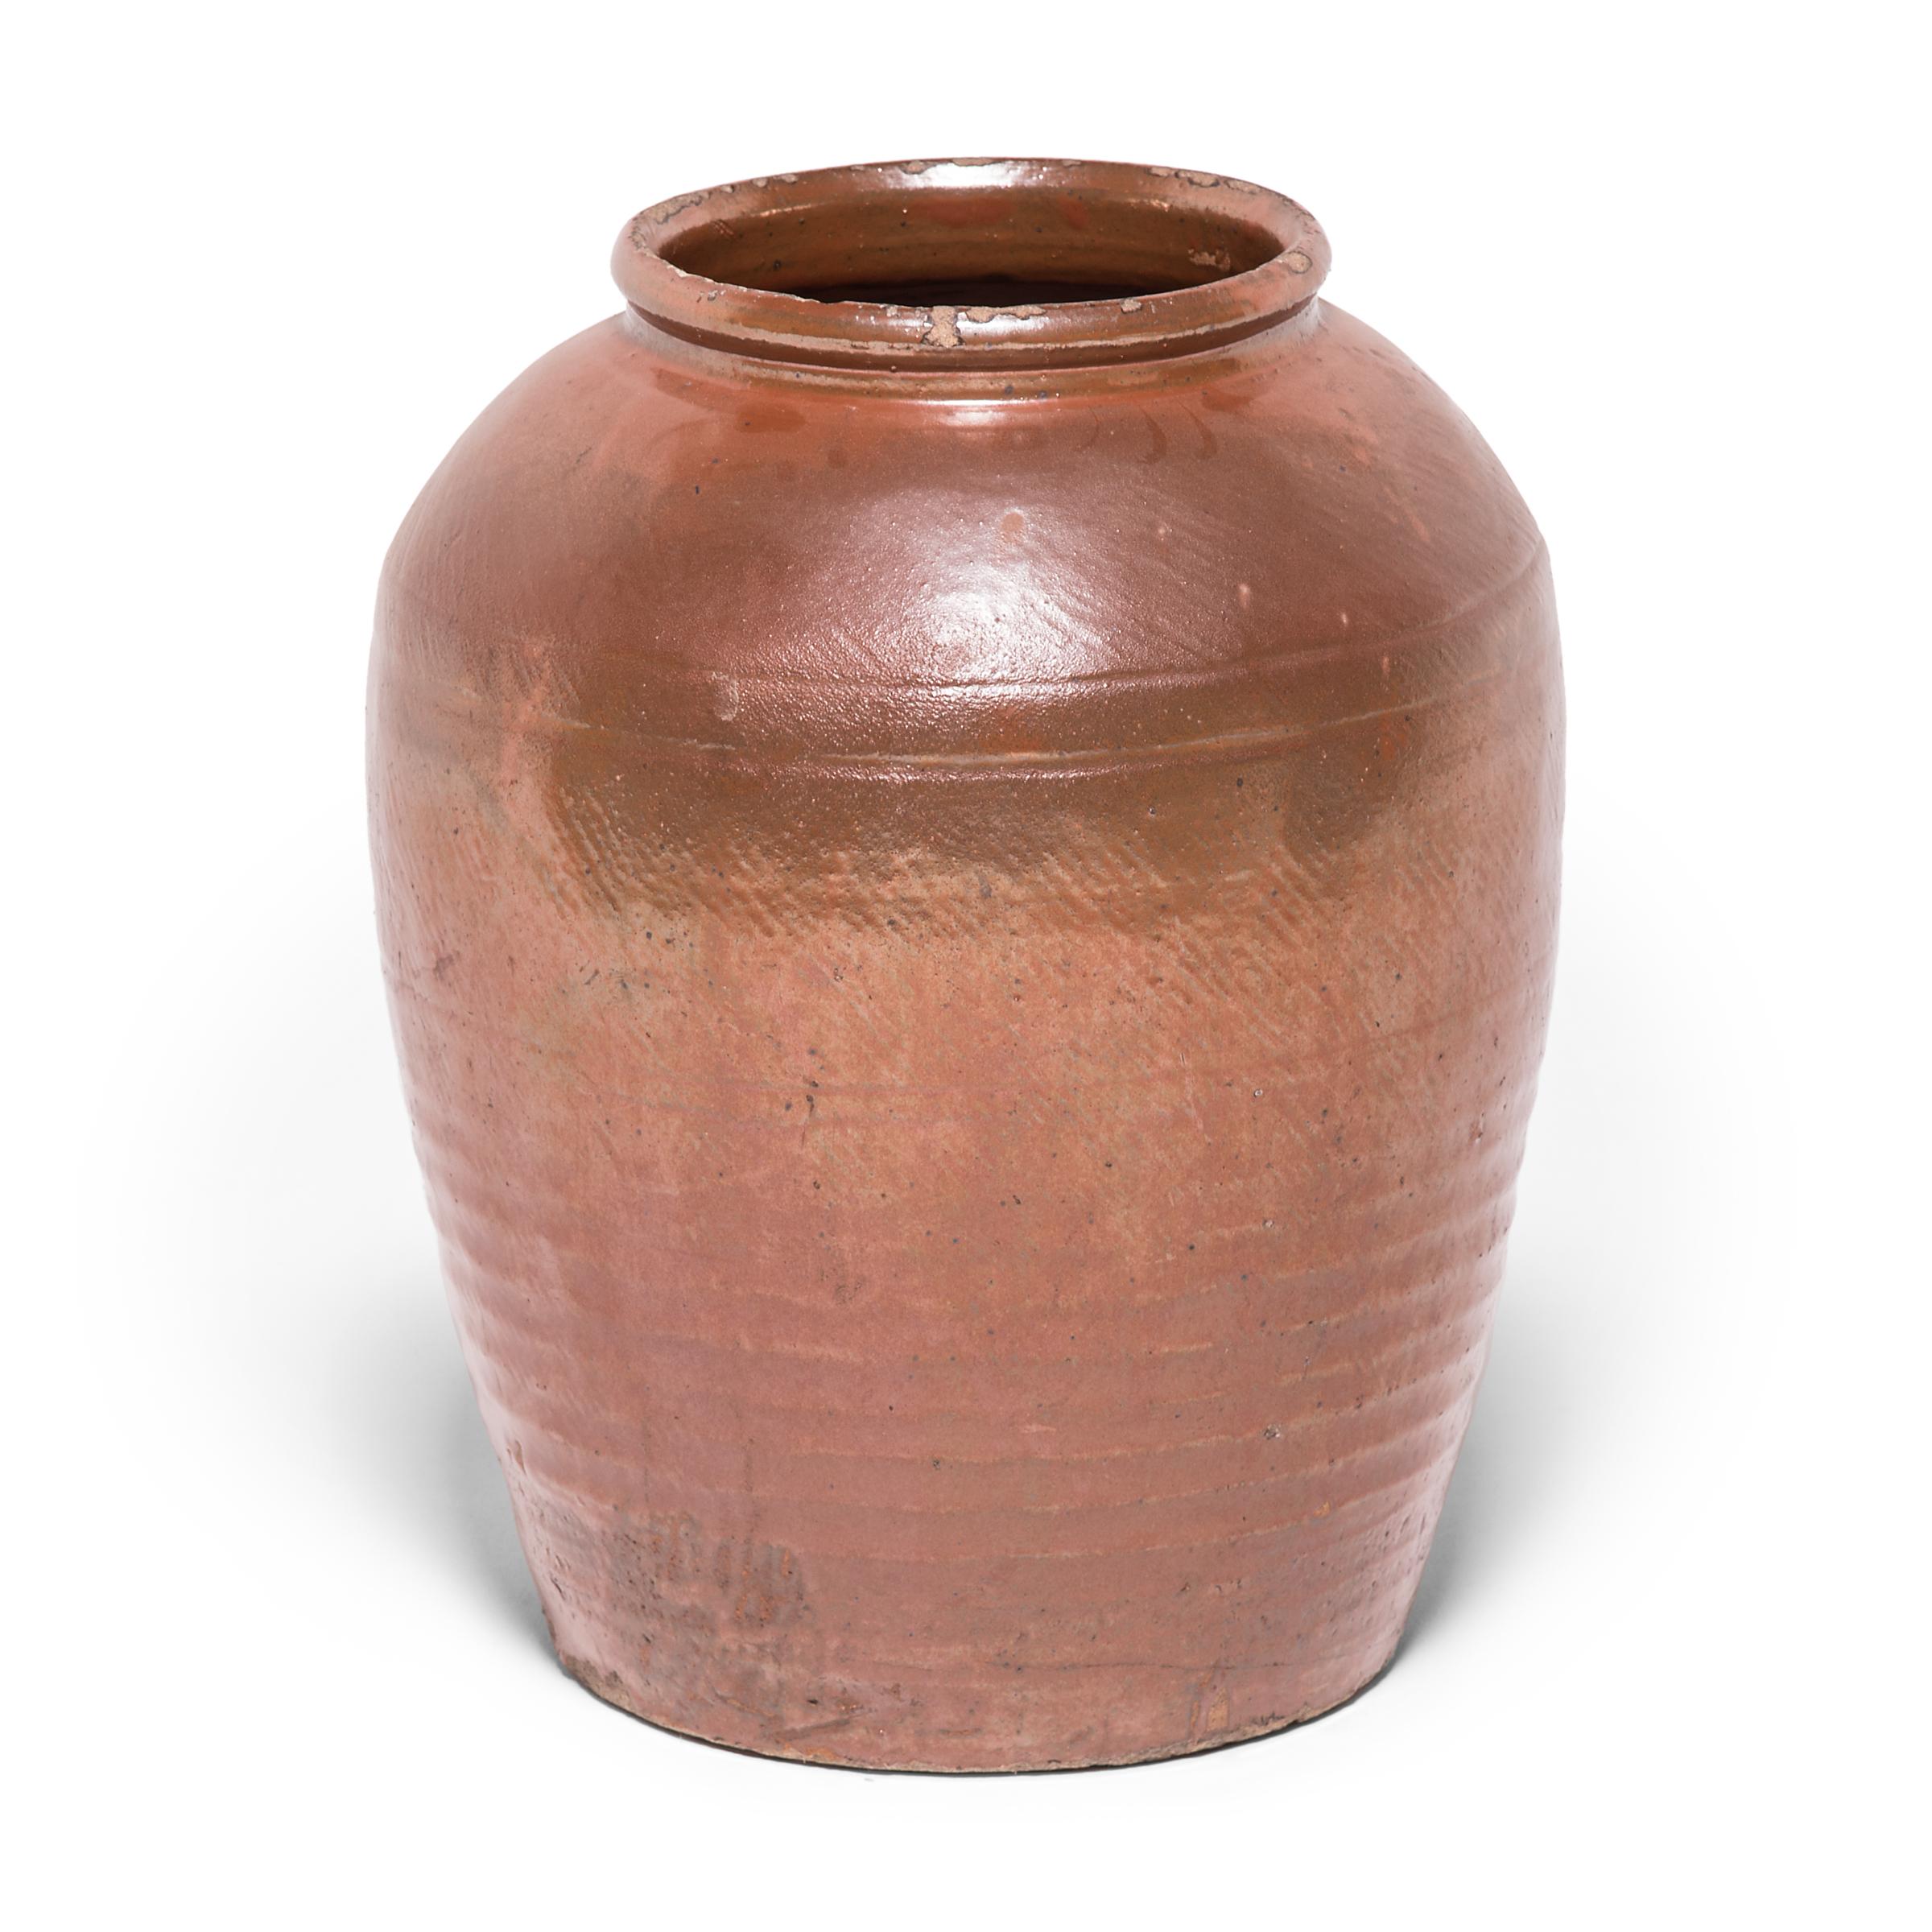 At once ancient and contemporary, this beautiful urn speaks to the timelessness of Chinese ceramic design. Made in northern China in the early 20th century, the urn pays respect to materials and craft, bearing the subtle ribs of its thrown